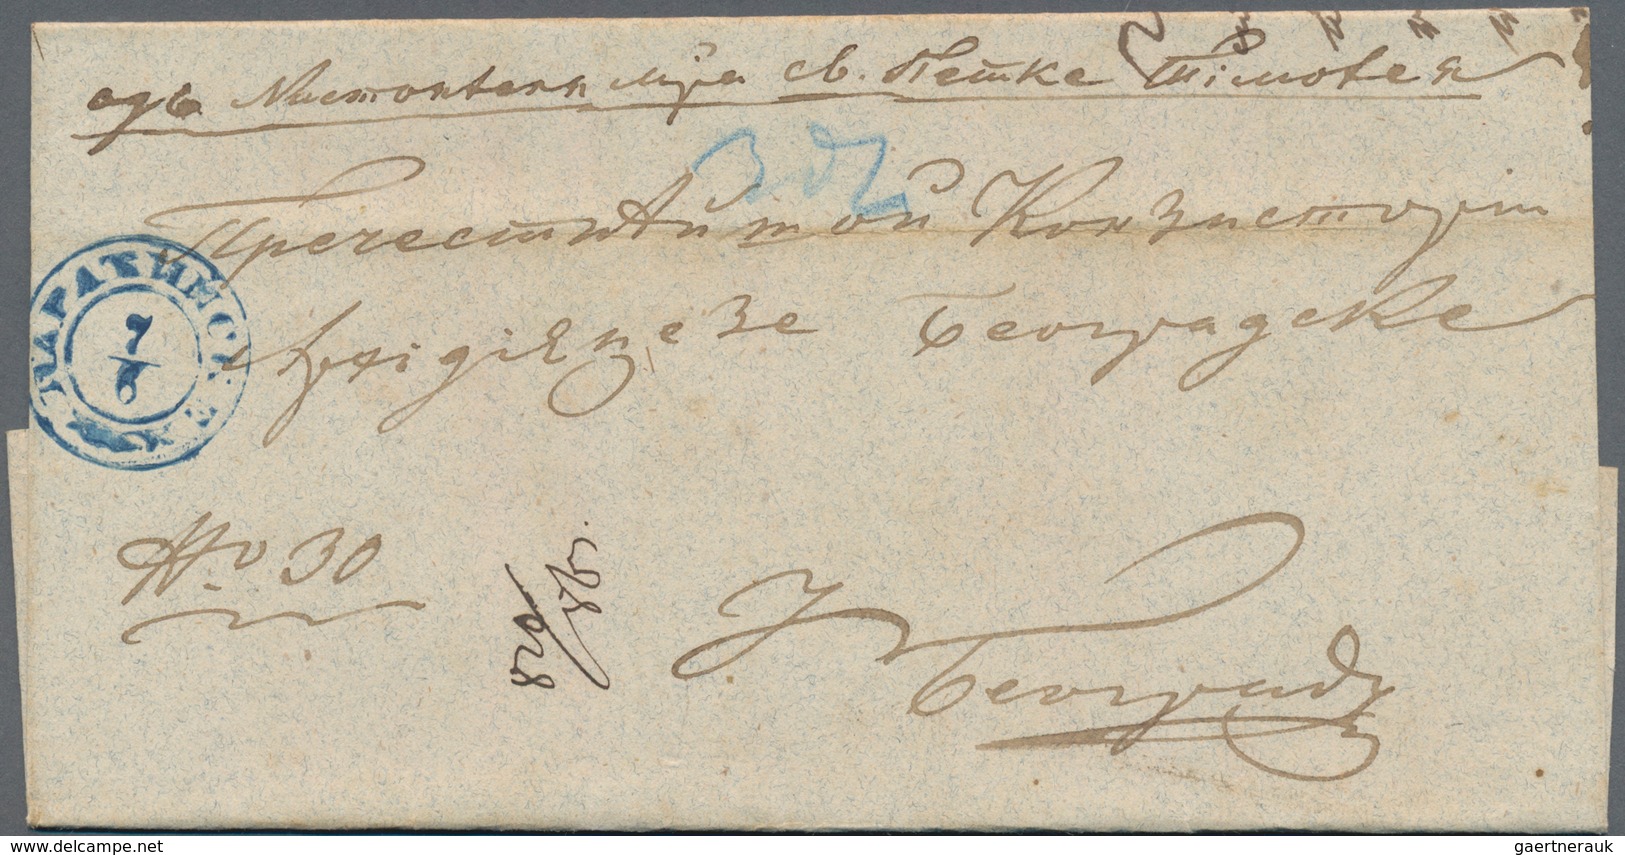 Serbien: 1844/1918, assortment of apprx. 40 covers/cards, comprising a nice range of stampless lette